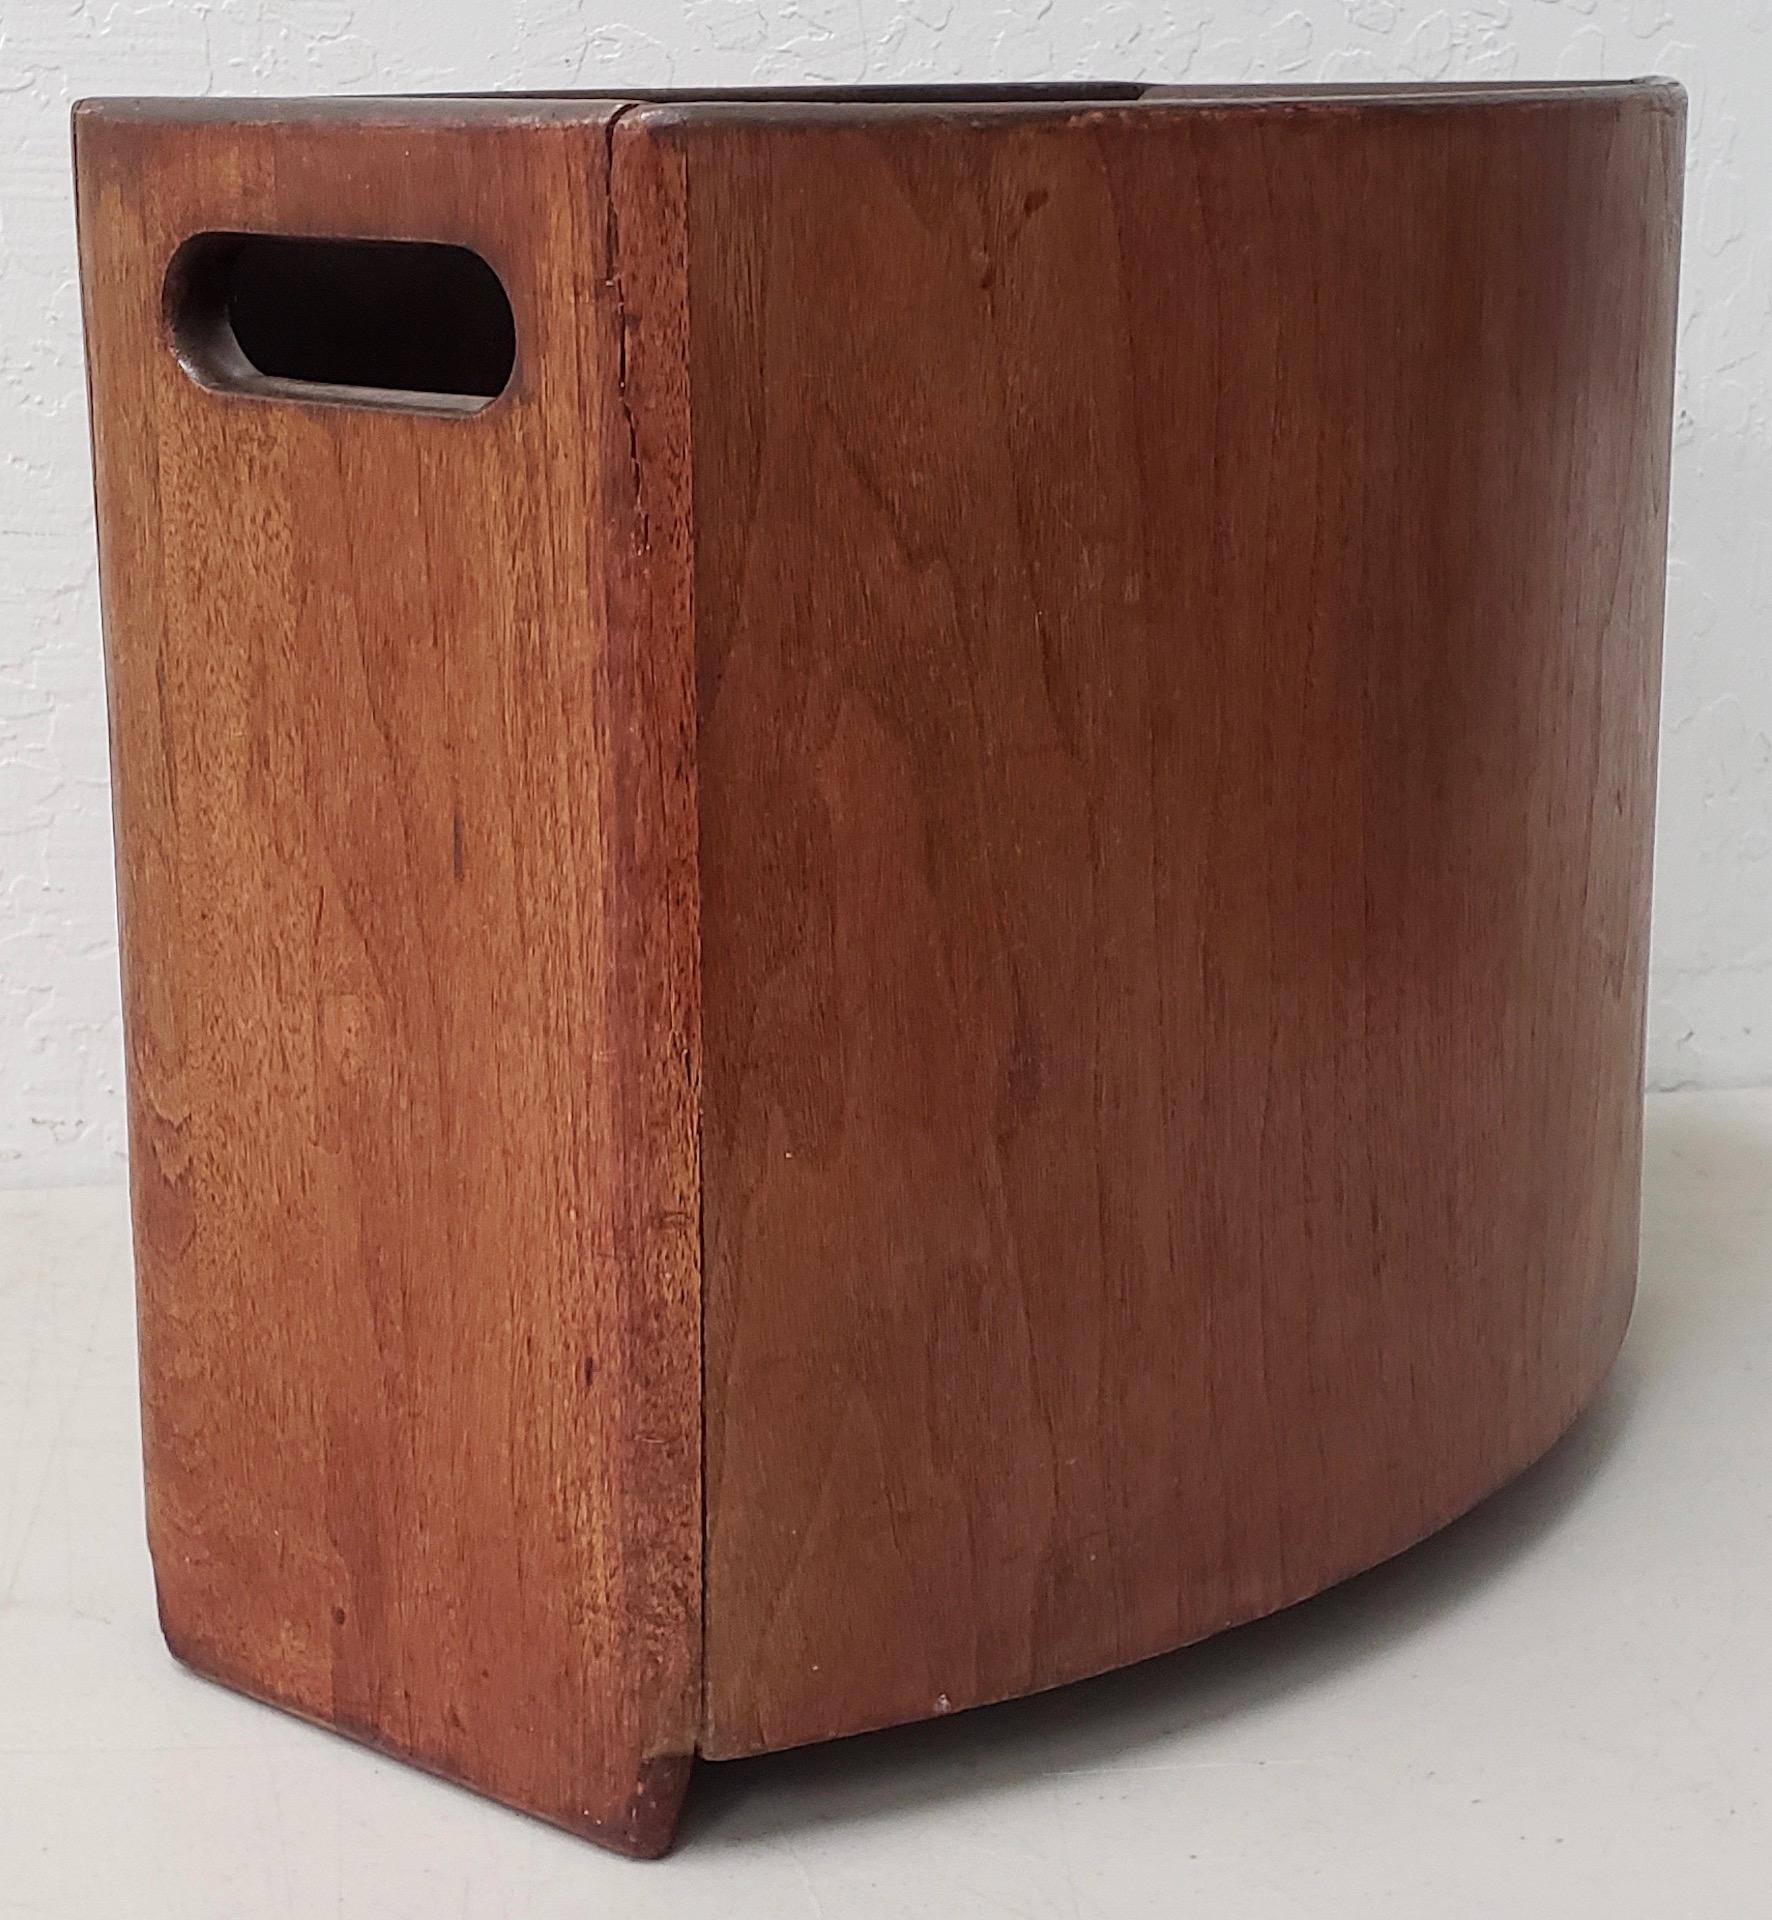 Mid-Century Modern Stow & Davis teak paper bin, circa 1960s

Vintage waste basket bin by Stow and Davis. The bin is made from teak. Good vintage condition. Small crack near the top. See pics.

Handles on each side for easy pick up.

Dimensions